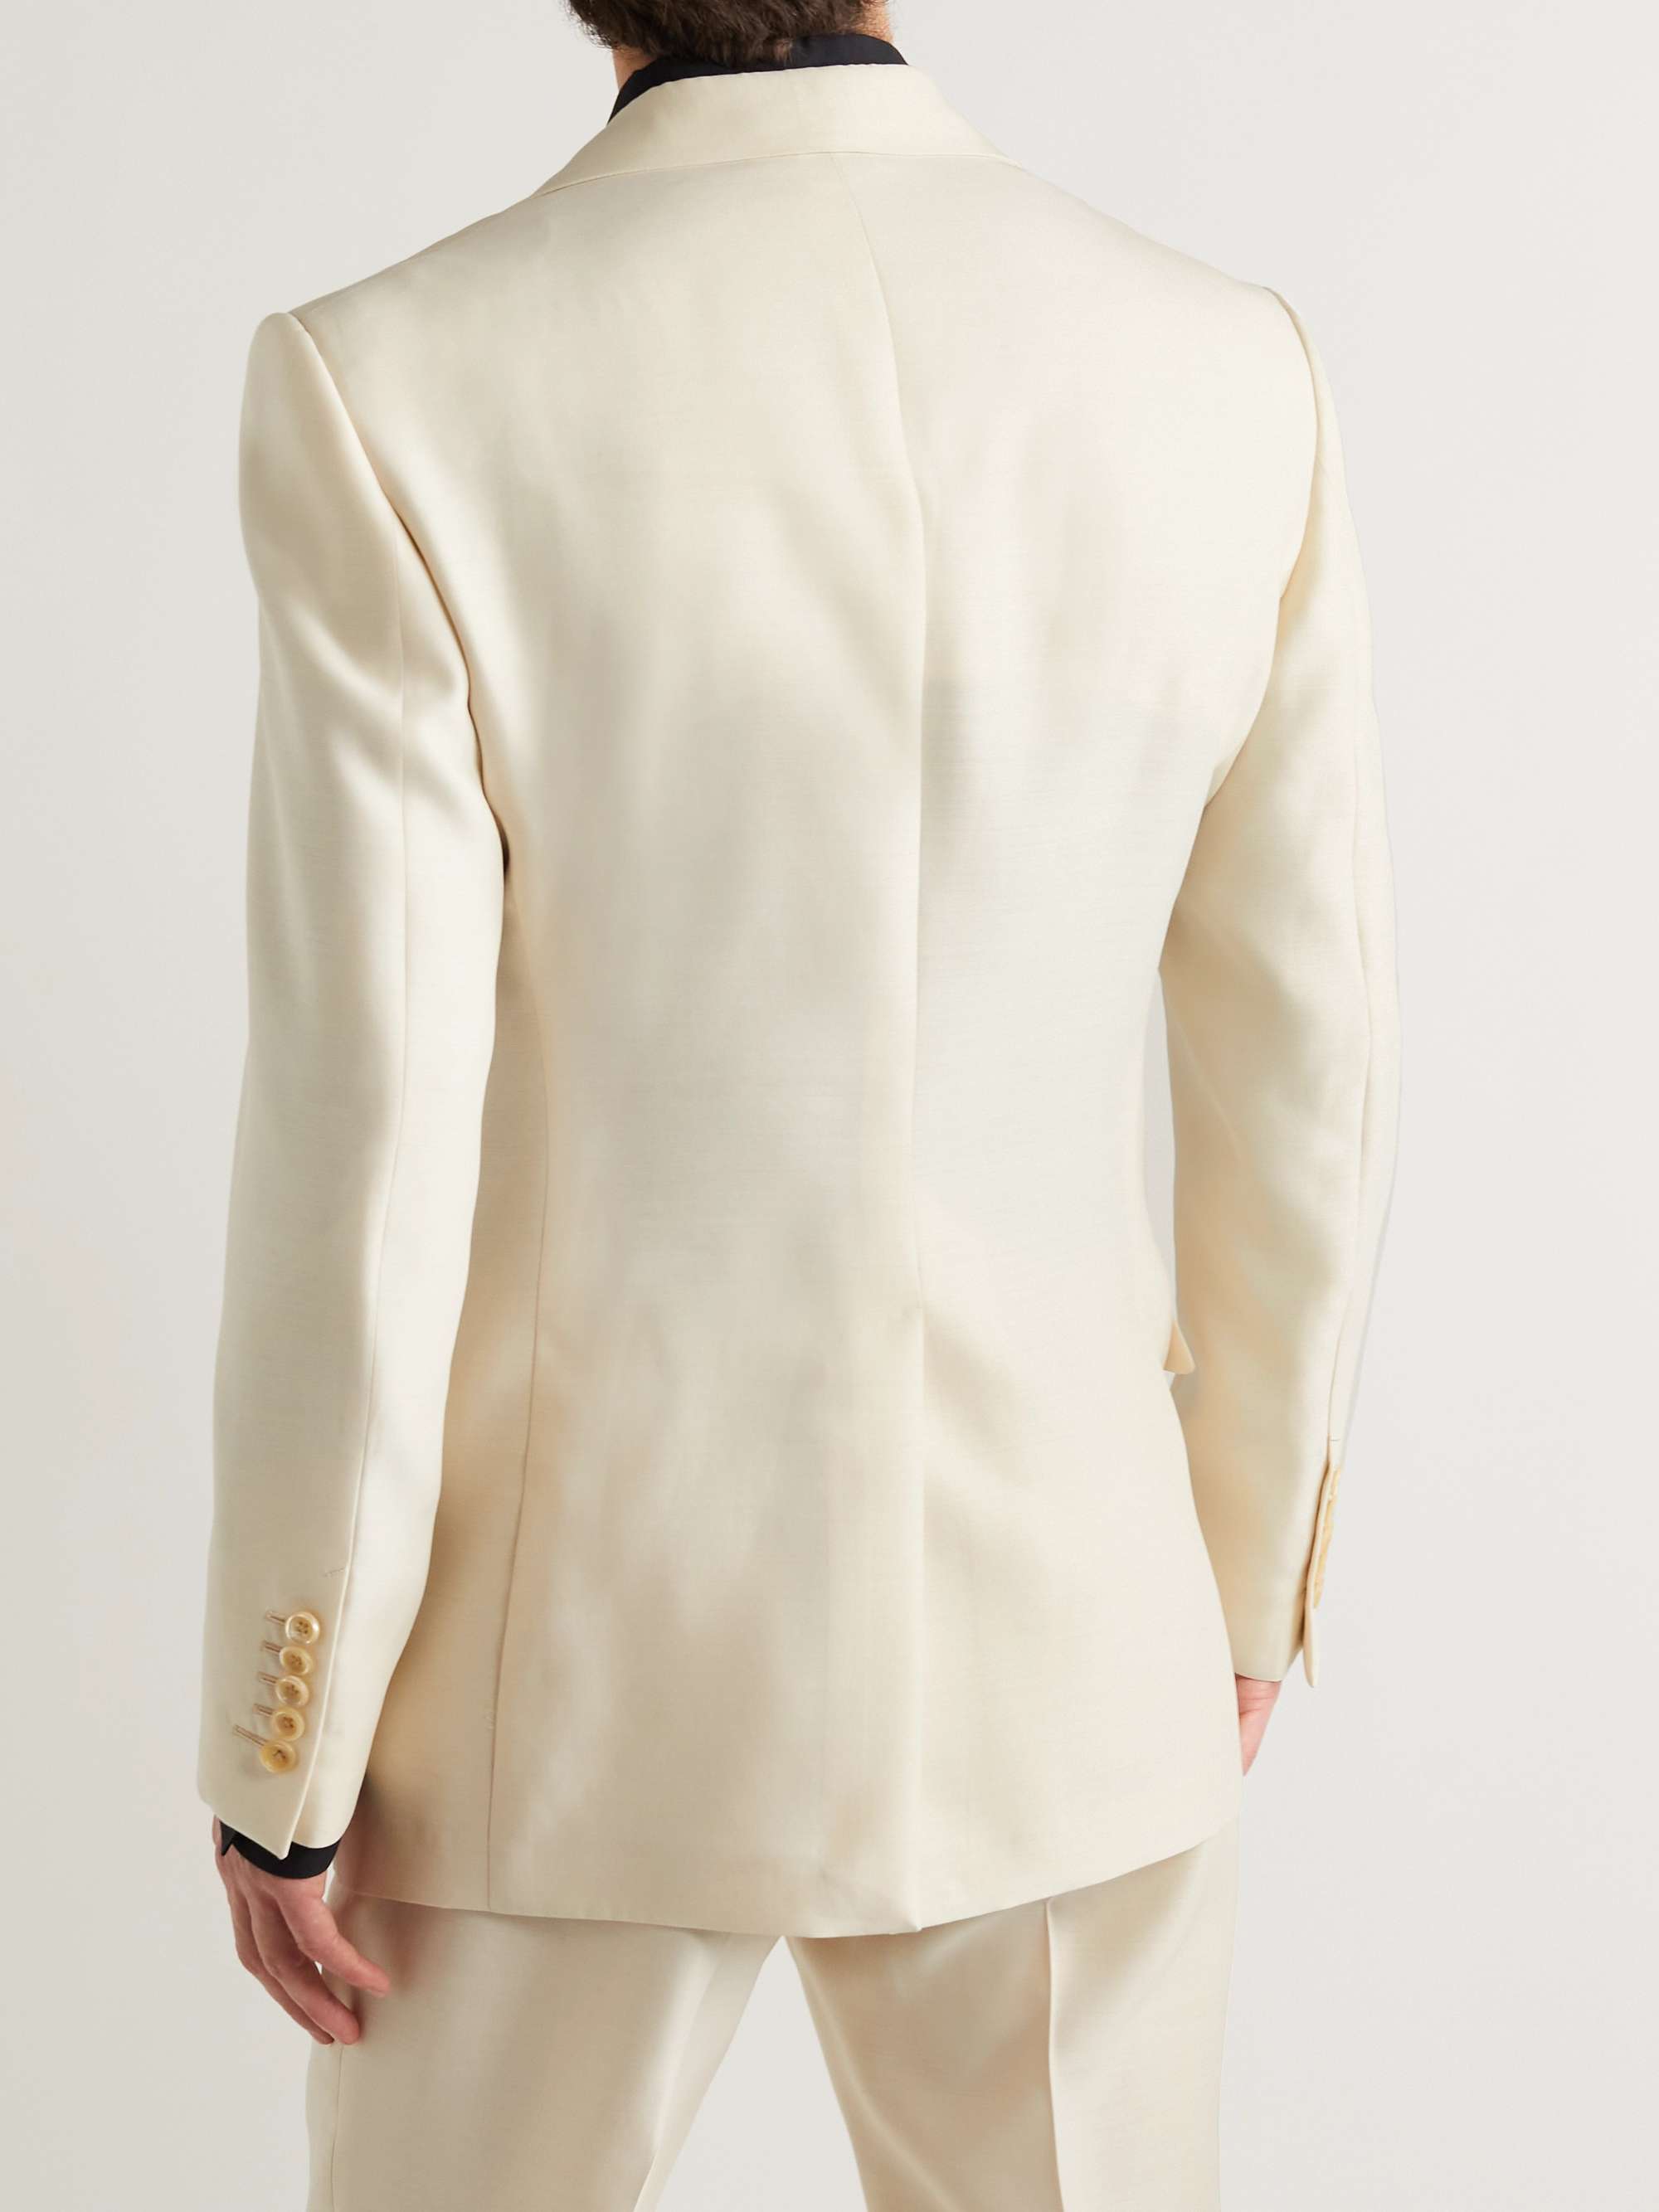 TOM FORD Spencer Wool and Silk-Blend Suit Jacket